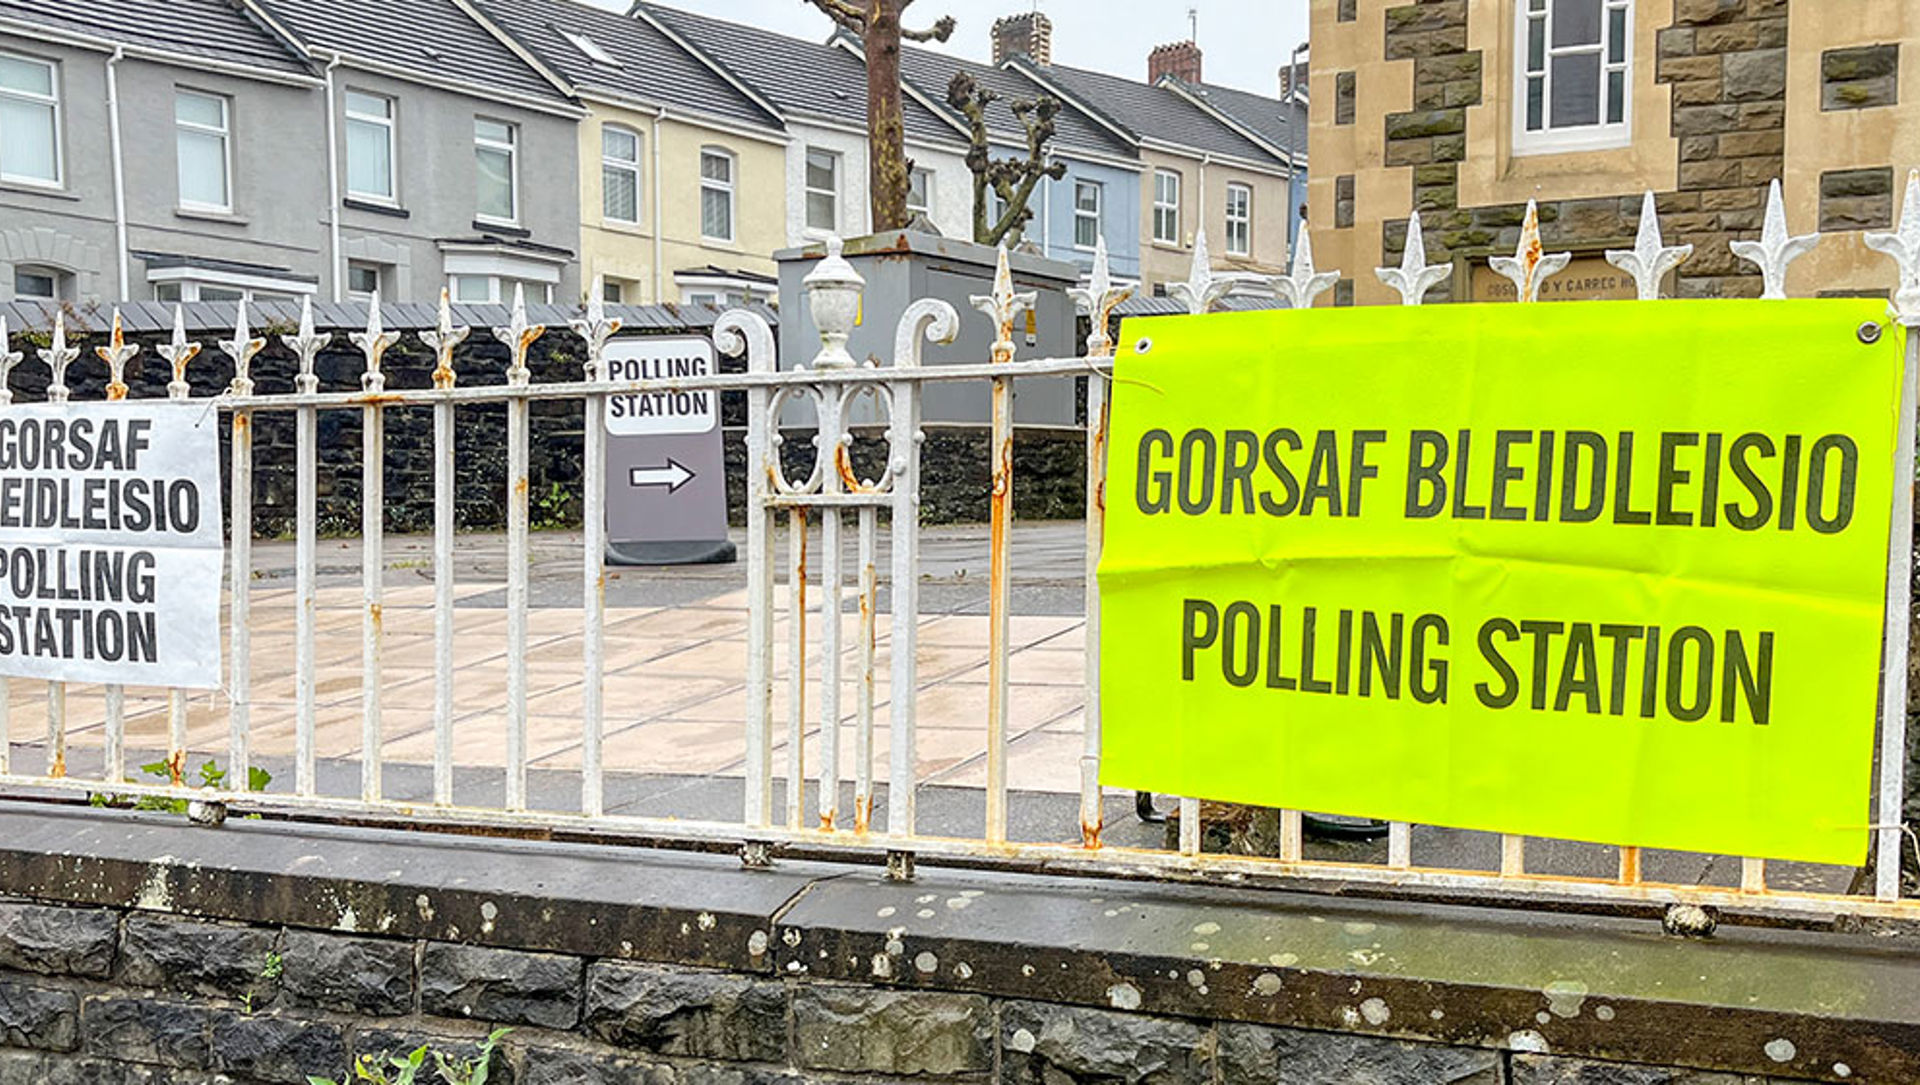 Outside a polling station in Wales